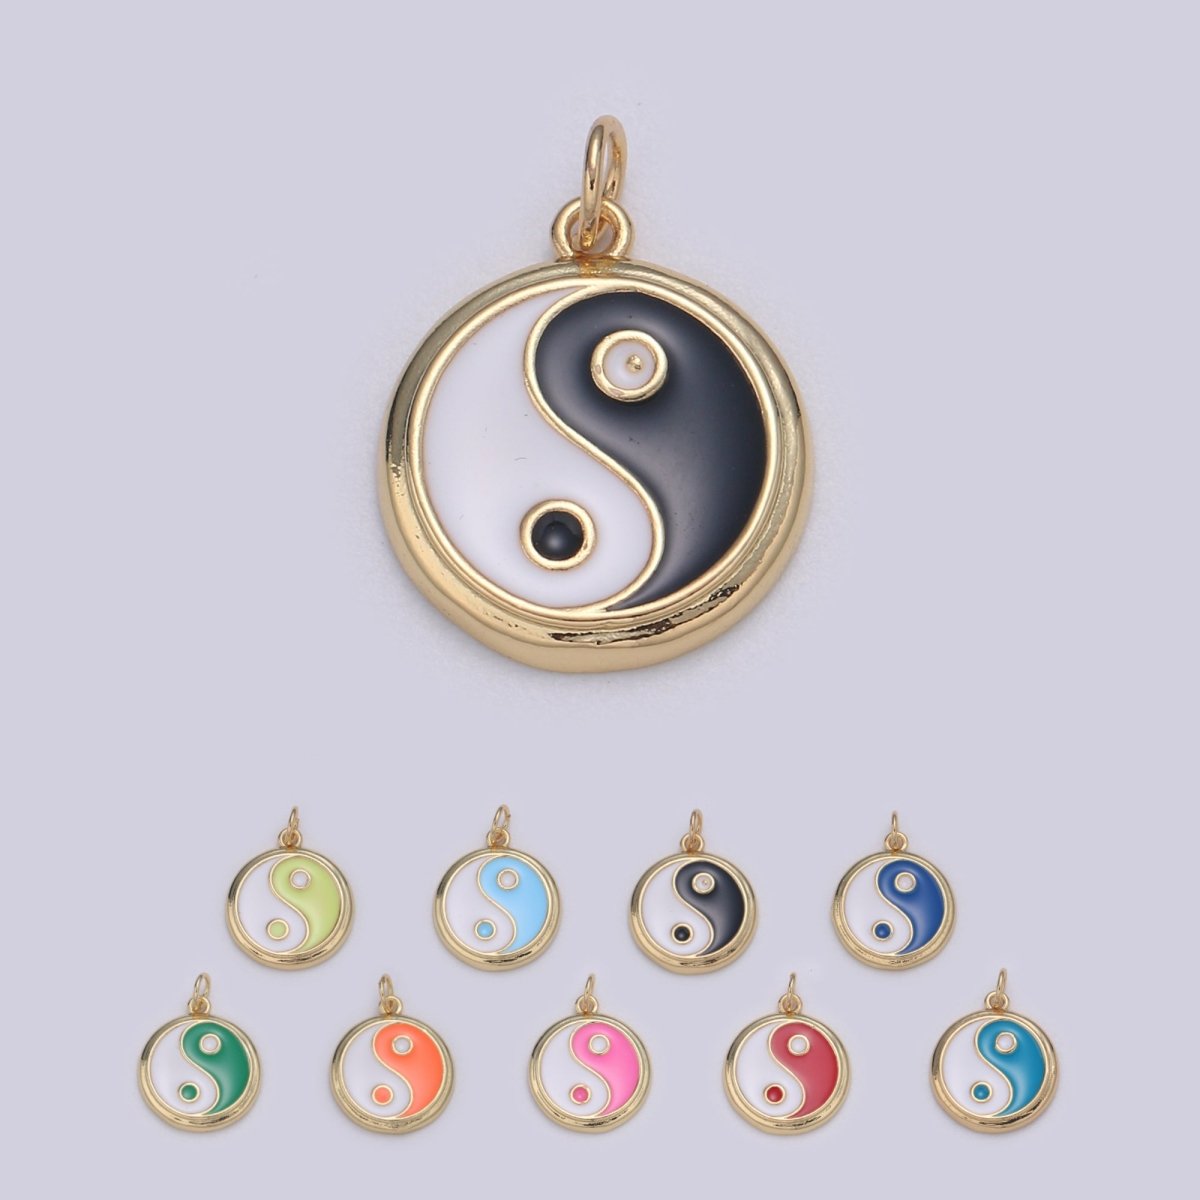 Gold yin yang charm, 14K Gold Filled Coin Charm Dainty Yin & Yang Charms for Bracelet Necklace Earring Component Colorful Enamel Pendant E-238 - E-246 - DLUXCA